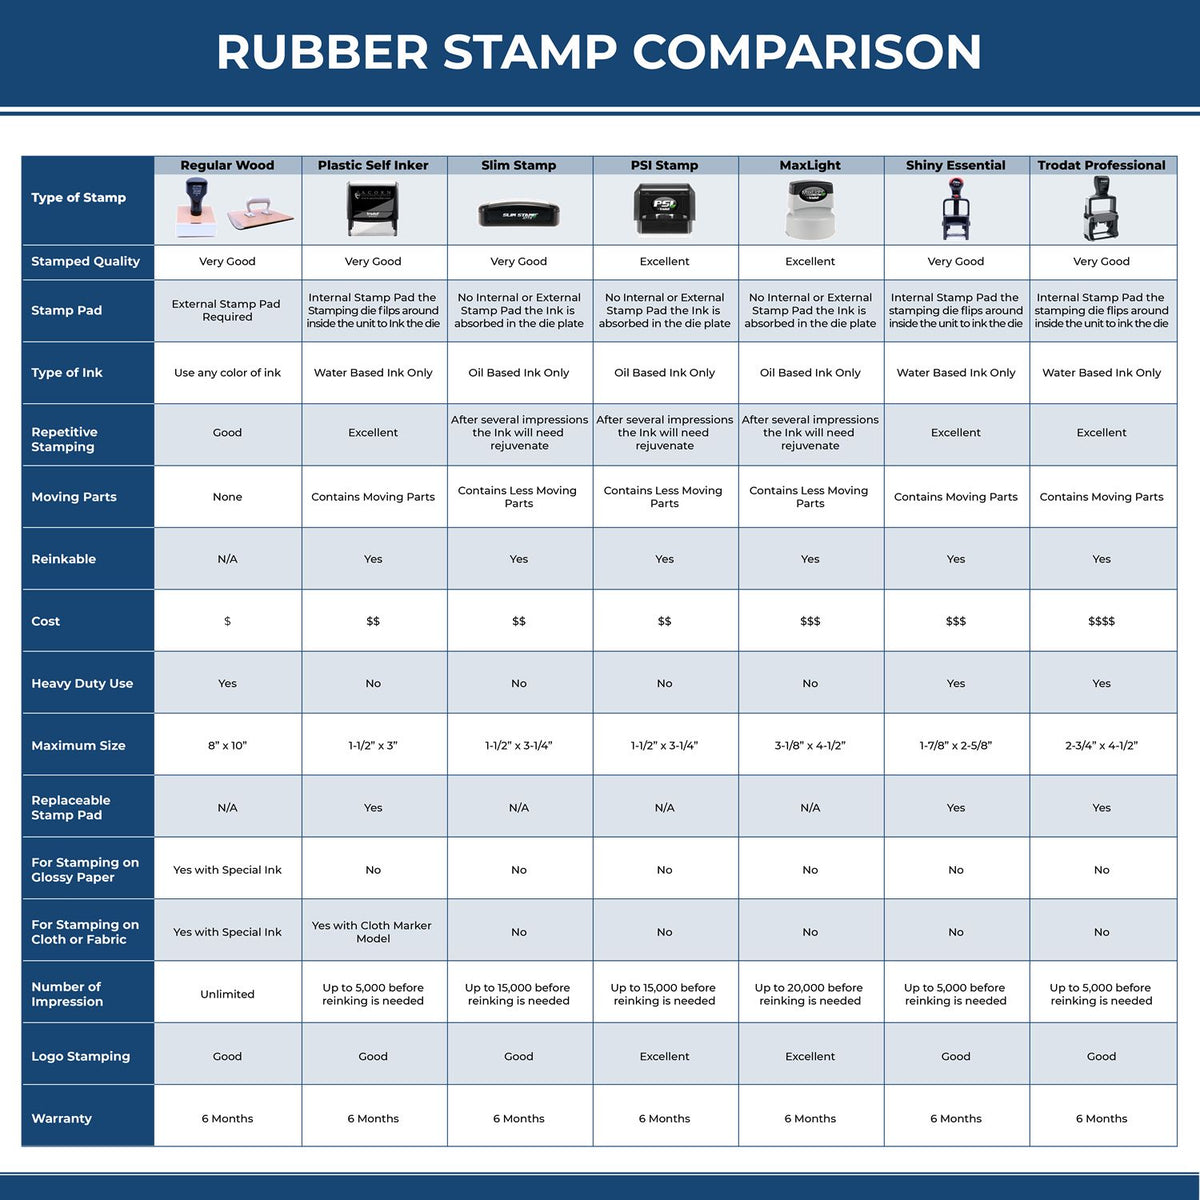 A comparison chart for the different types of mount models available for the Self-Inking Maine PE Stamp.